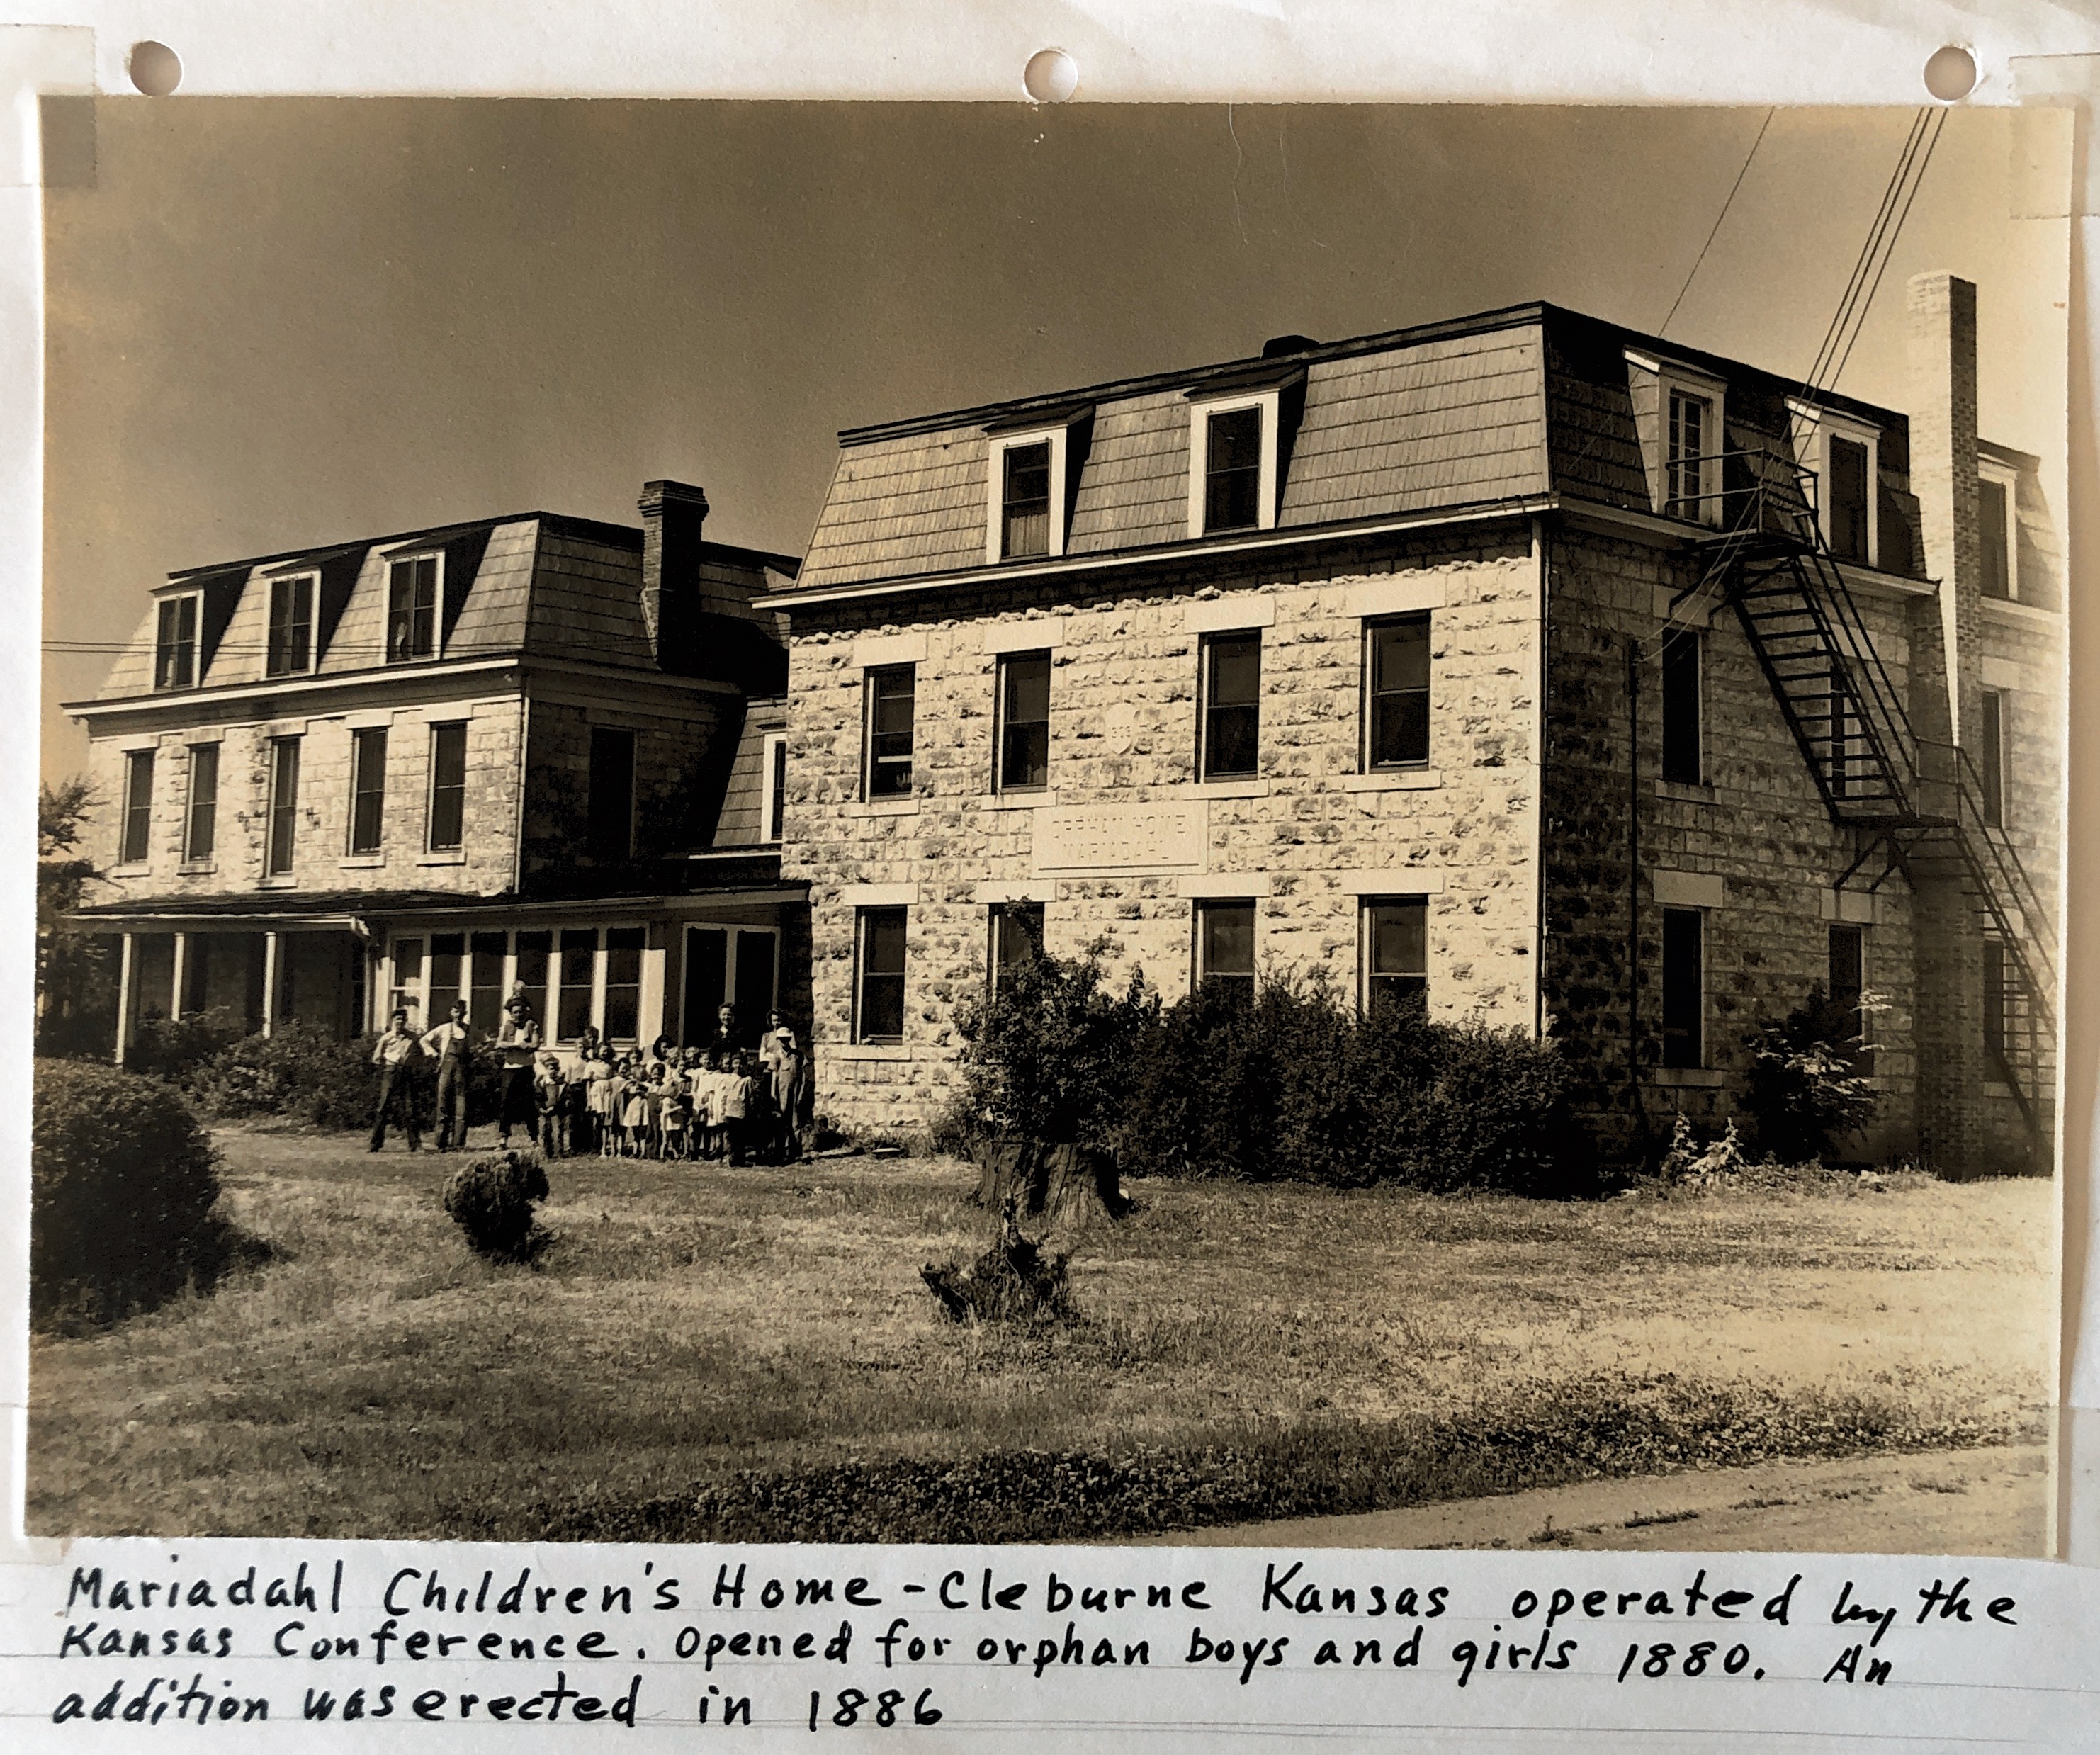 Mariadahl Children’s Home, Cleburne, Kansas. Reverend Otto Olson Oleen accepted a call to the home and to Mariadahl Lutheran Church in 1931. The family moved there in 1932. Reverend Otto Olson Oleen and his family stayed there 14 years(until 1946). 